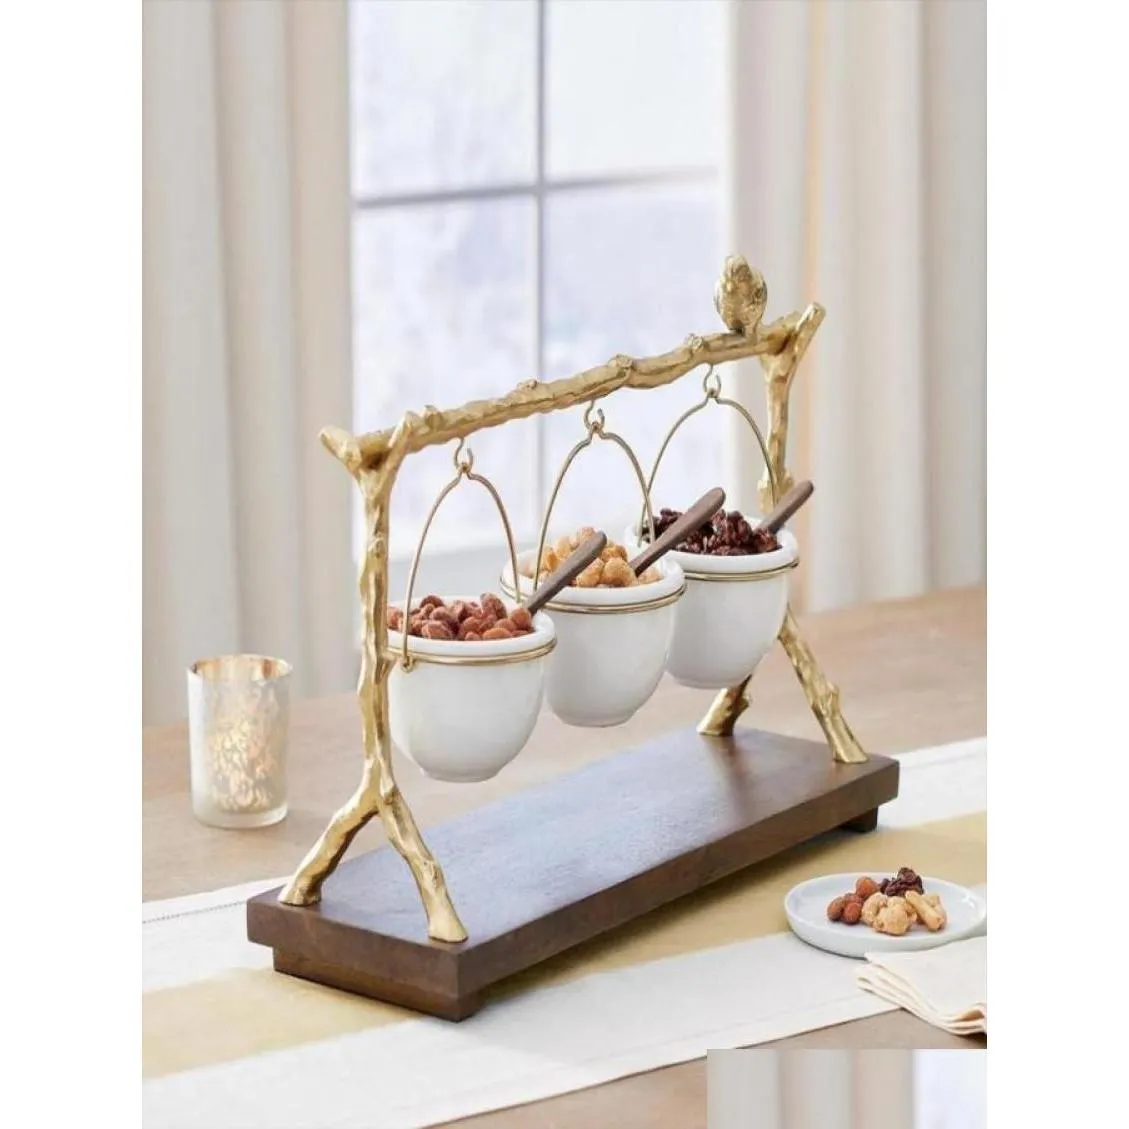 Dishes & Plates Dishes Plates Gold Oak Branch Snack Bowl Stand Resin Christmas Rack With Removable Basket Organizer Party Decorations7 Dhwug